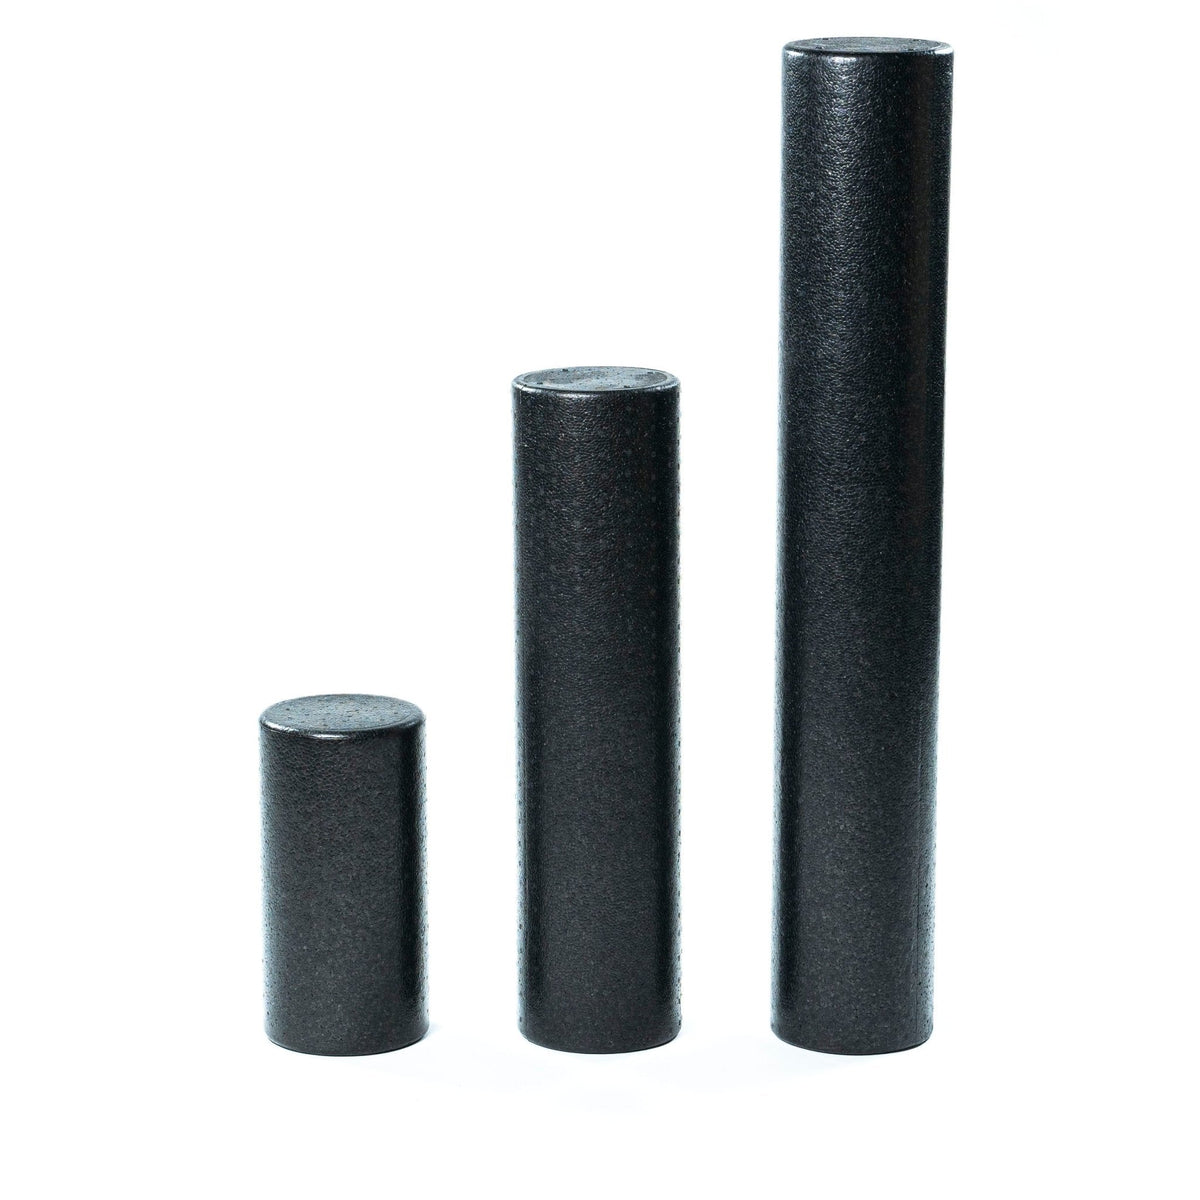 FitWay Equip. Foam Roller 30cm - Fitness Experience